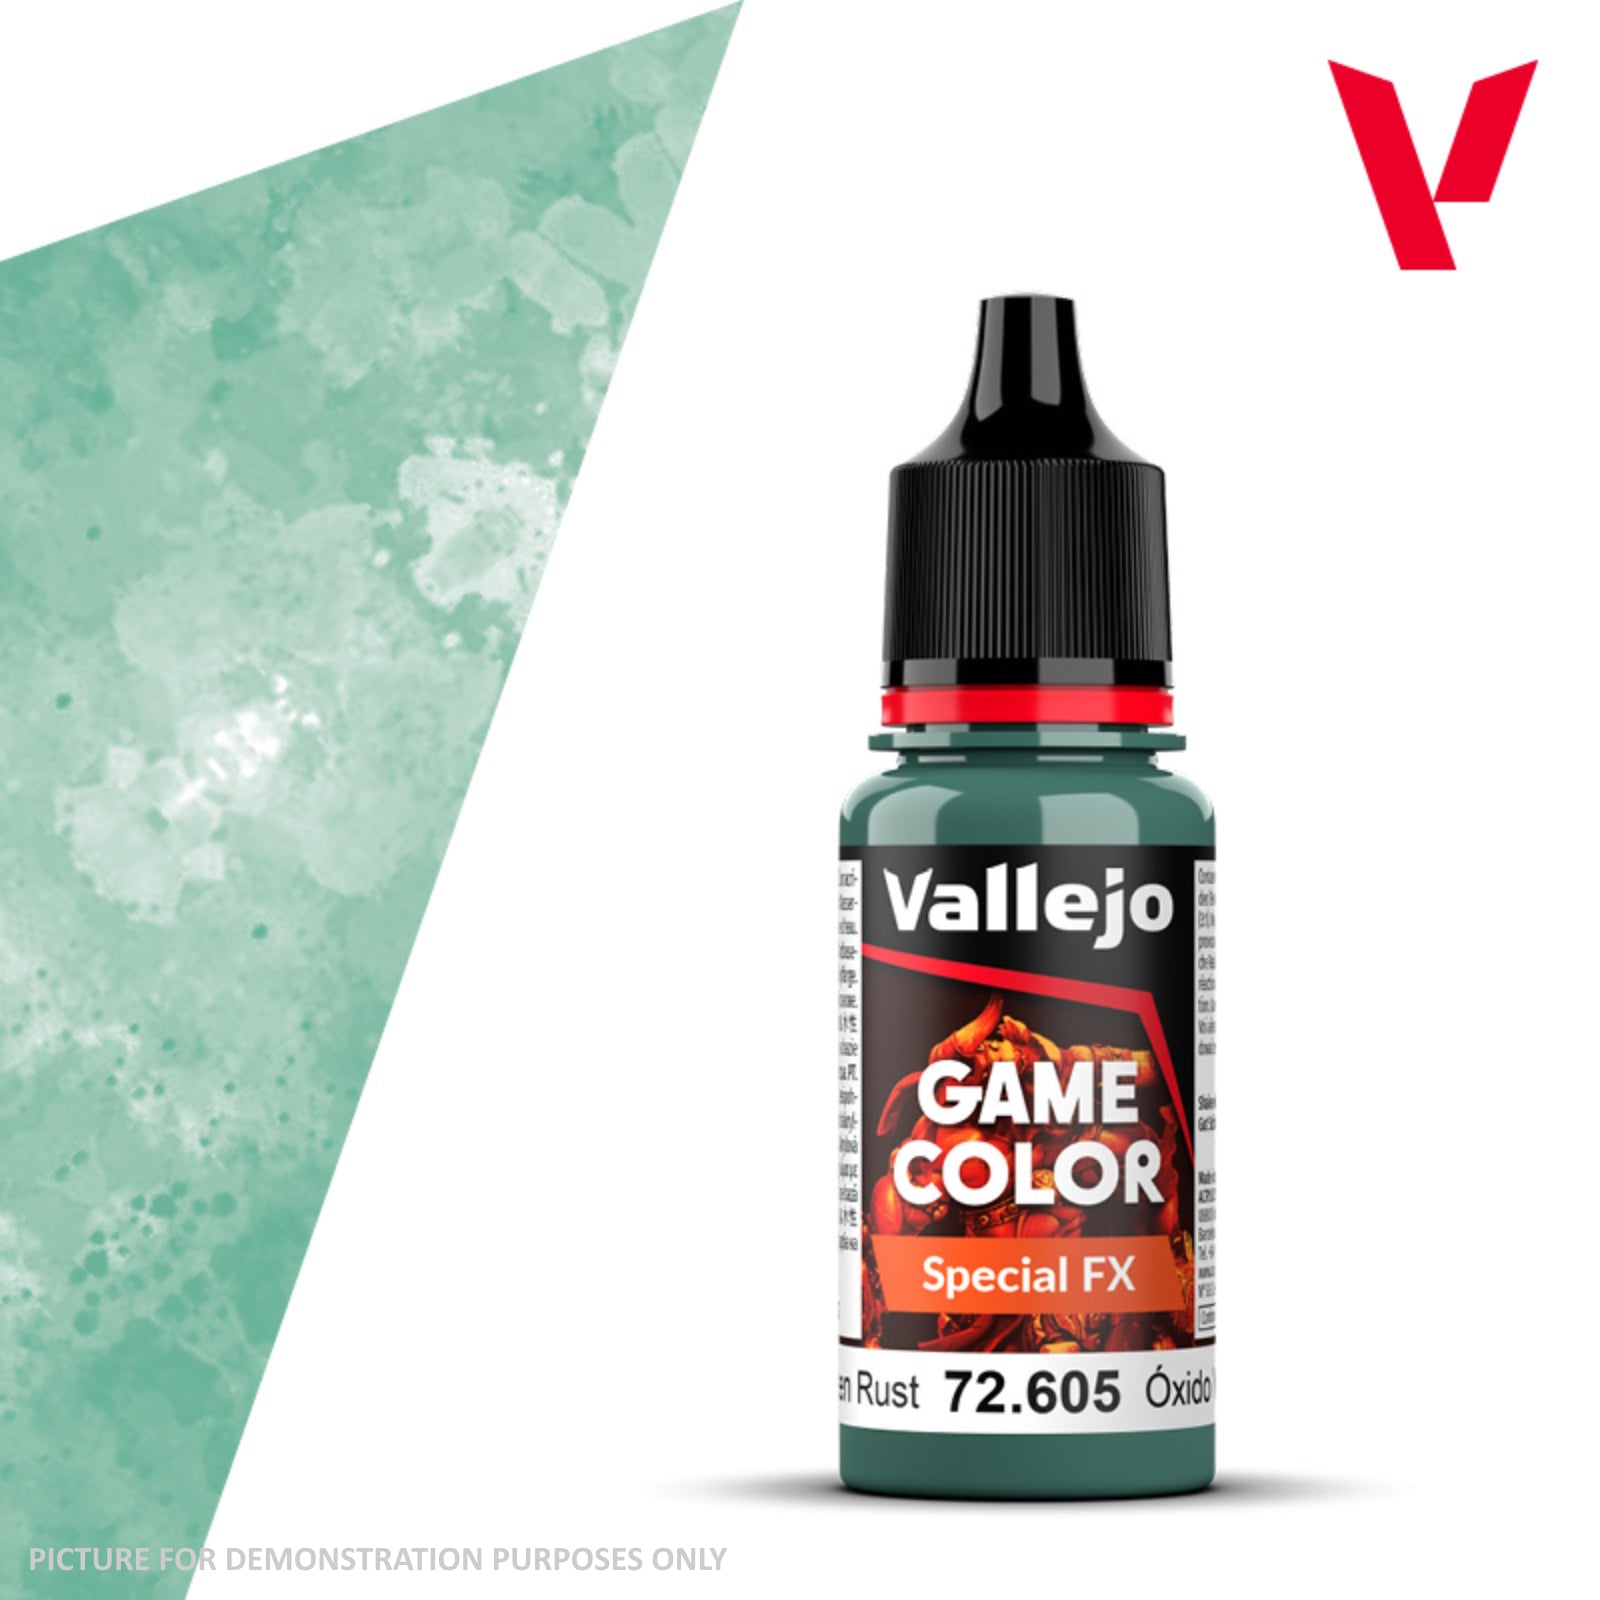 Vallejo Game Colour Special FX - 72.605 Green Rust 18ml